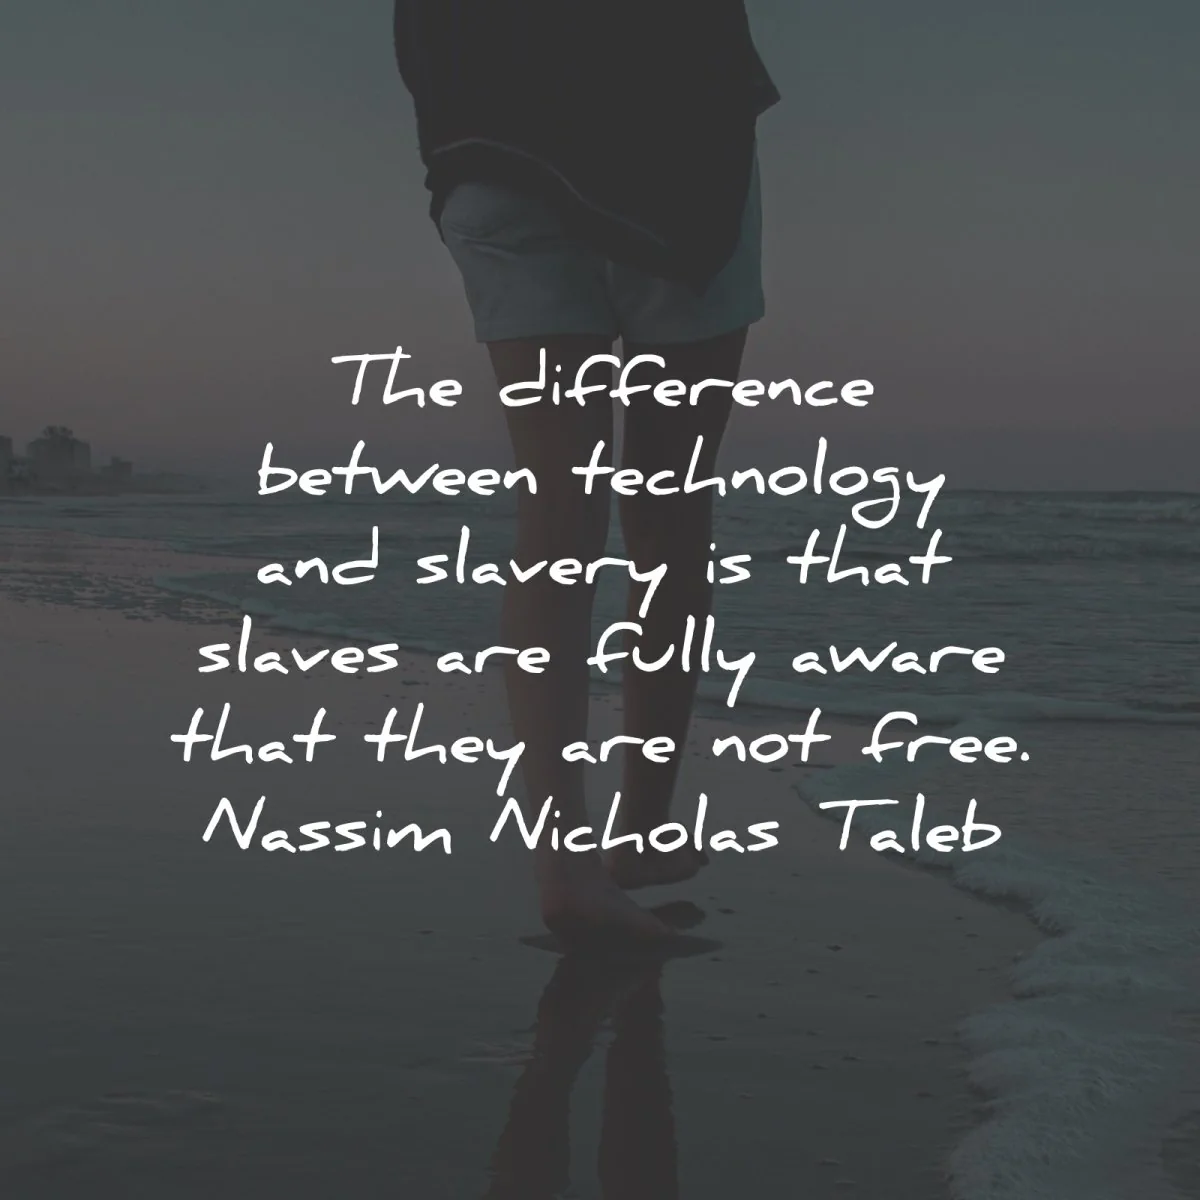 addiction social media quotes difference between technology slavery nassim nicholas tabel wisdom